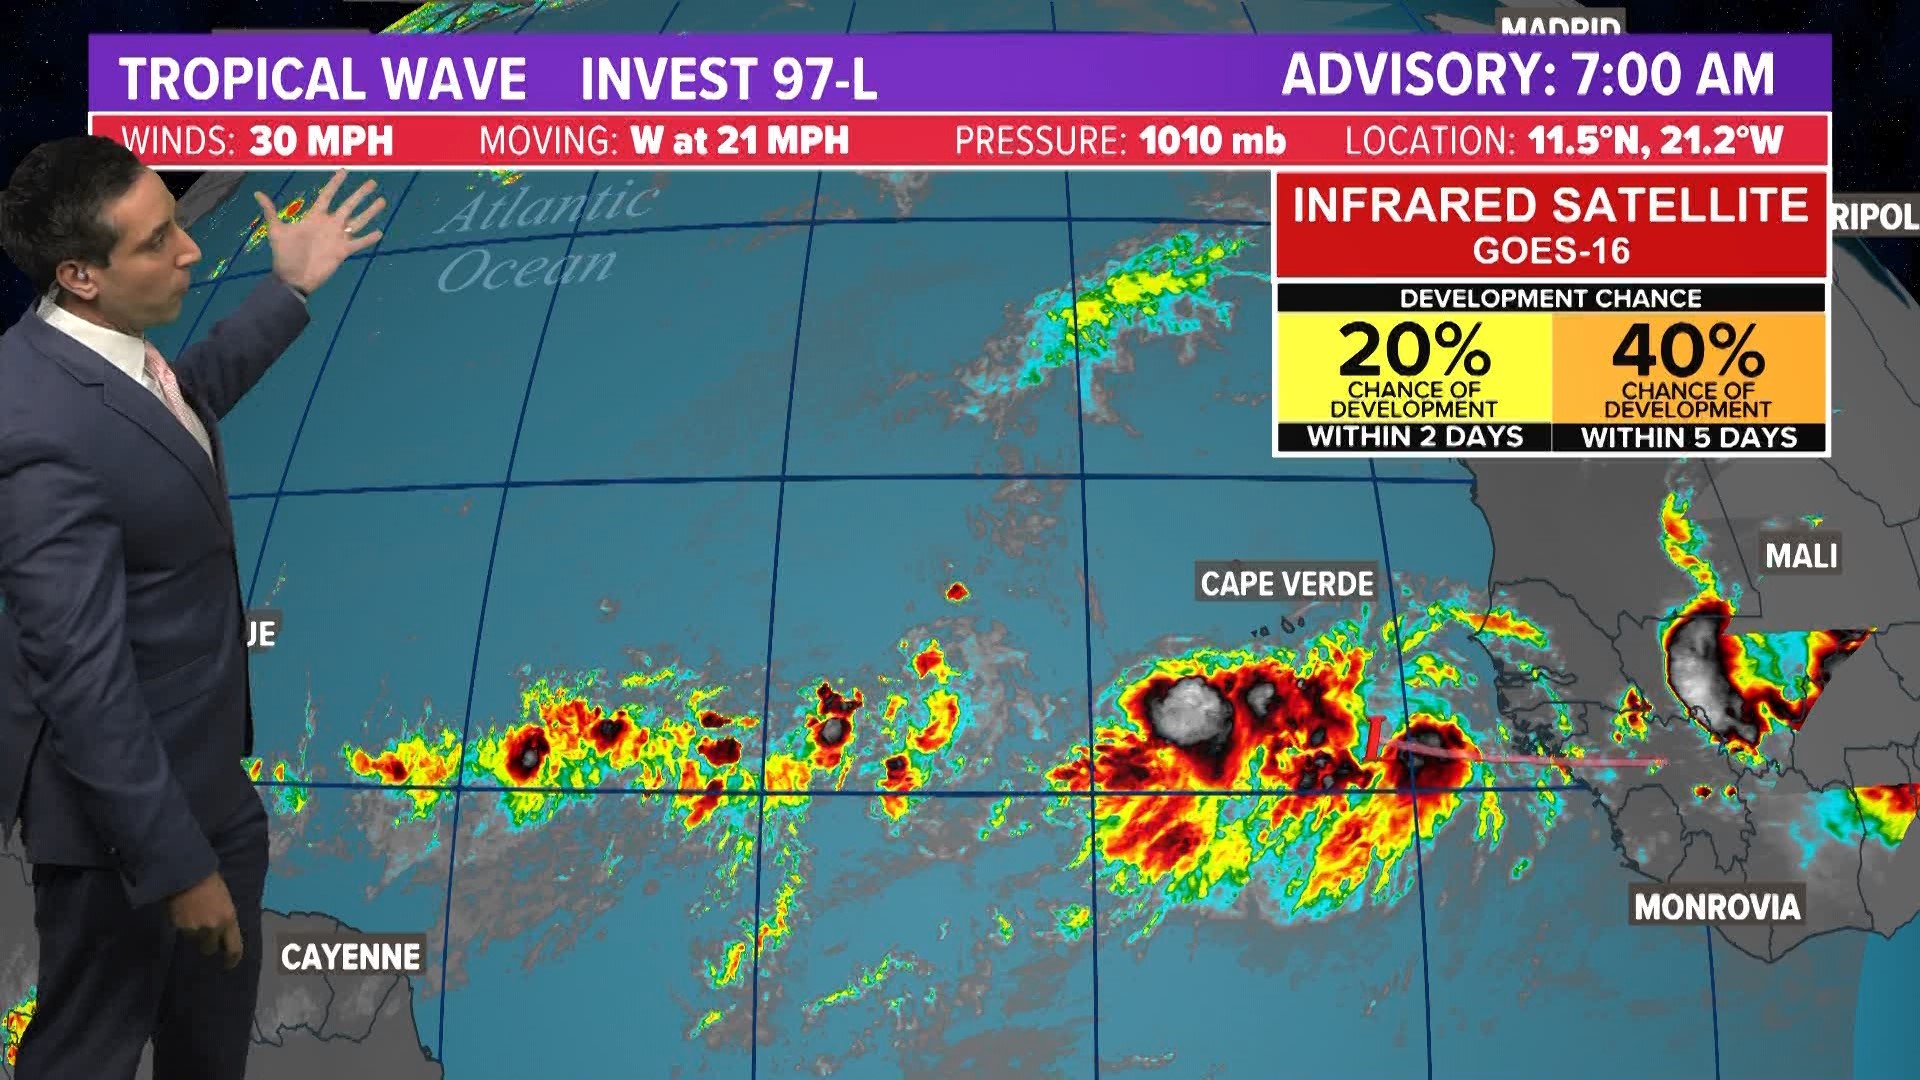 Invest 97-L near Africa's Cape Verde islands could become Danielle.